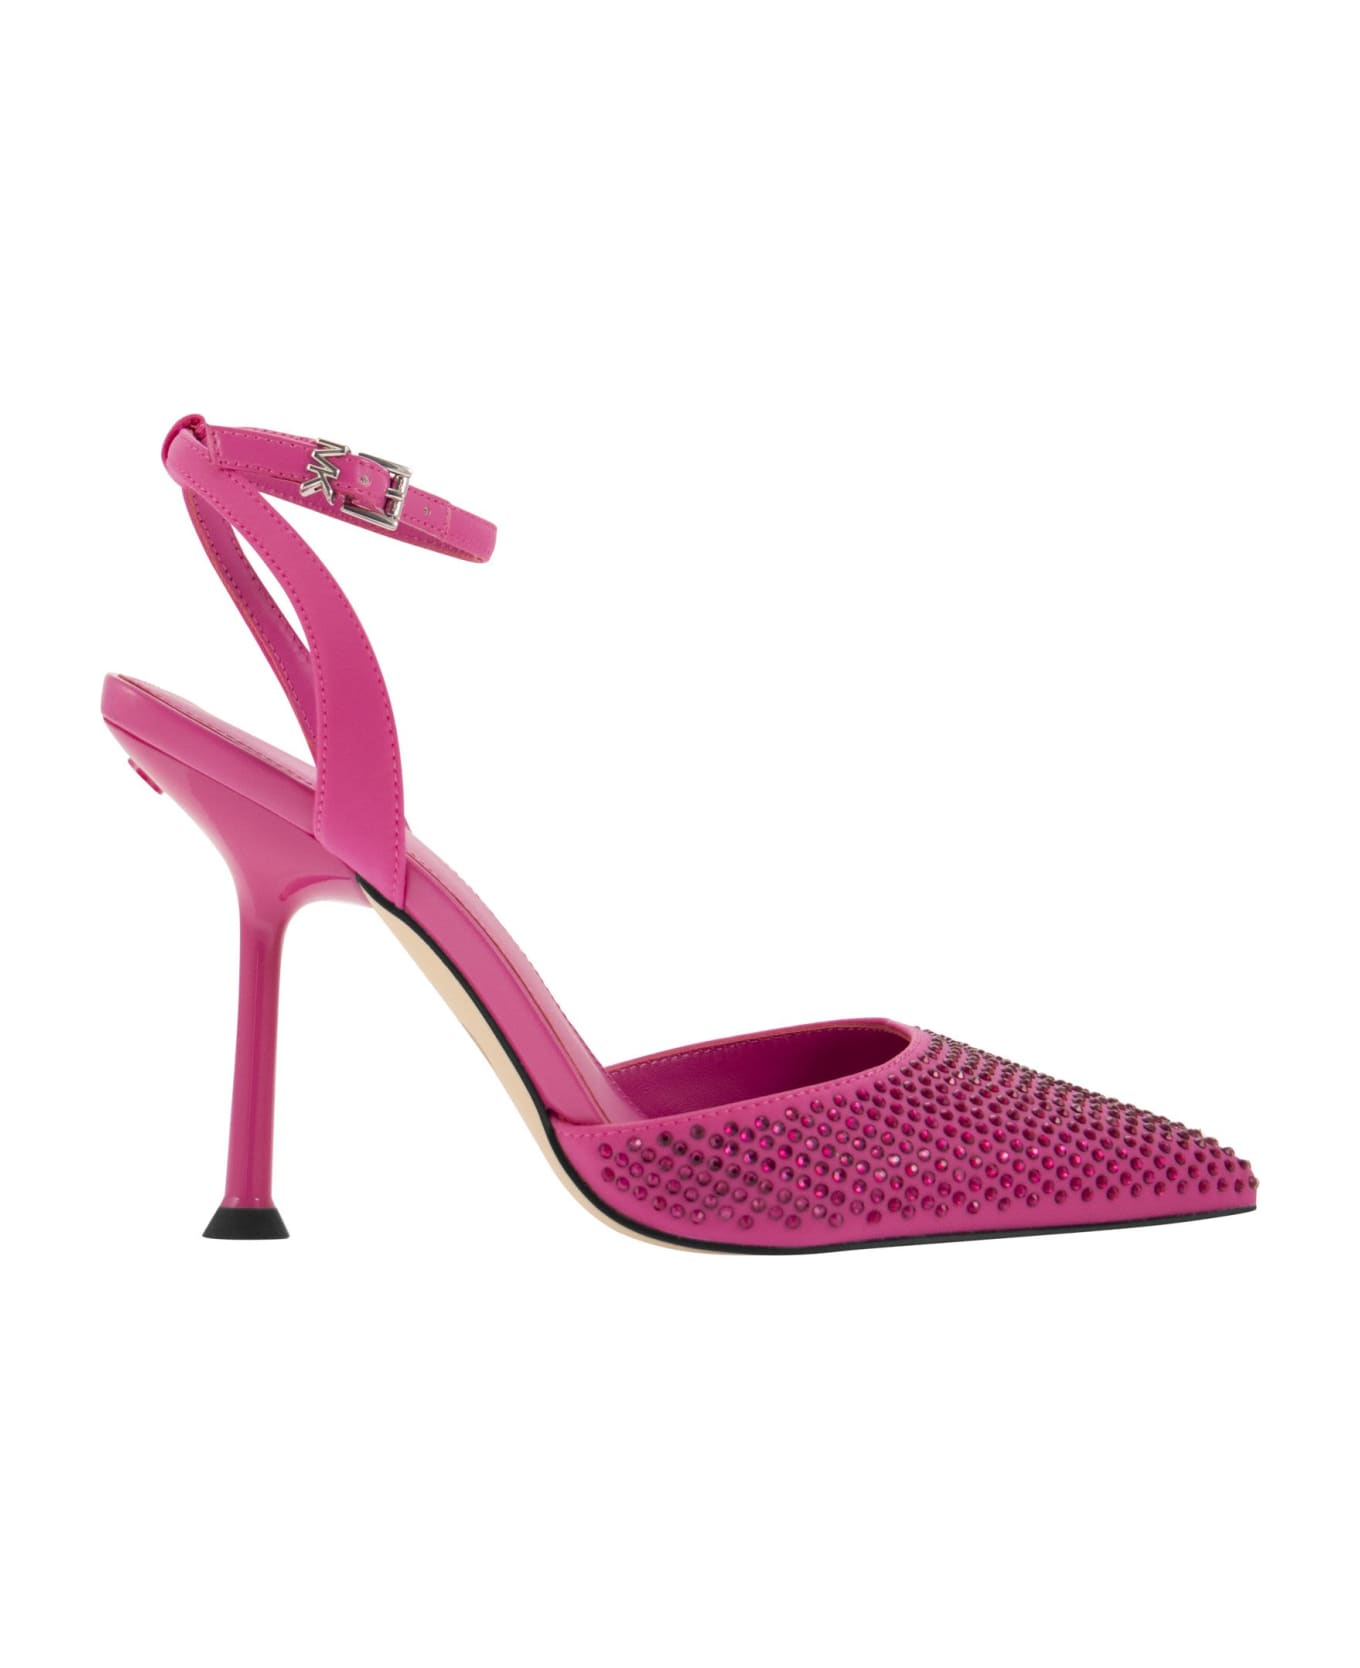 MICHAEL Michael Kors Imani Pump Pumps In Fabric With Crystals - Fuchsia